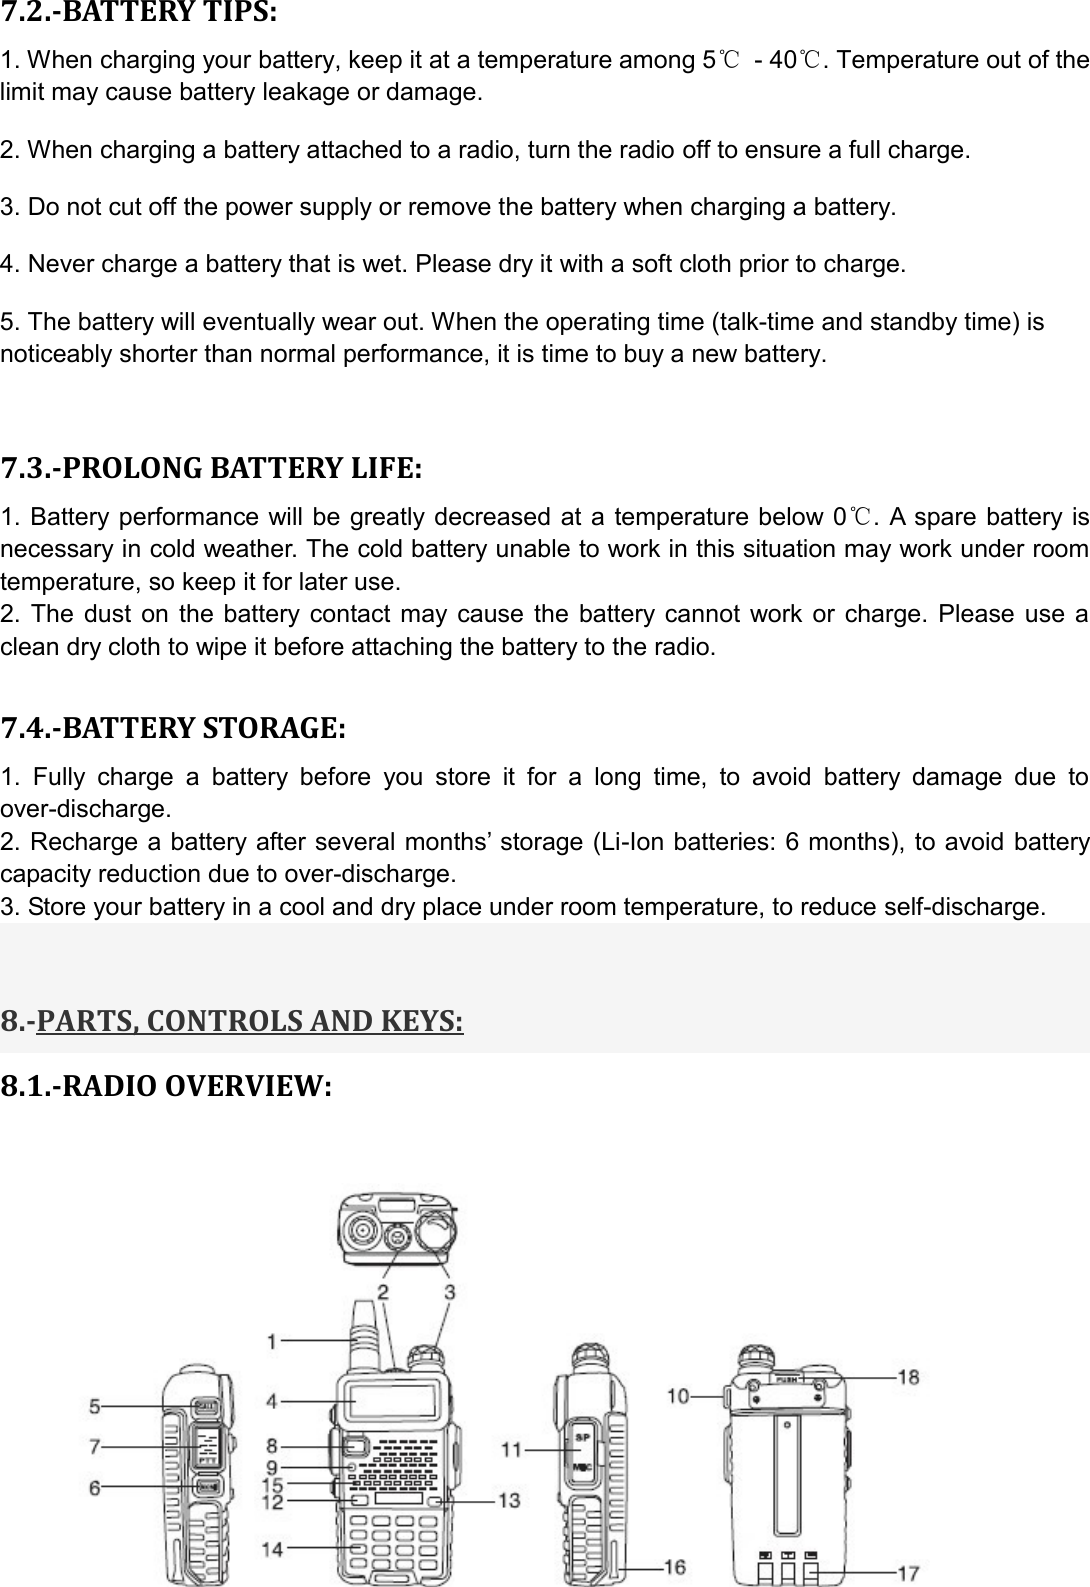 7.2.-BATTERY TIPS: 1. When charging your battery, keep it at a temperature among 5℃ - 40℃. Temperature out of the limit may cause battery leakage or damage.   2. When charging a battery attached to a radio, turn the radio off to ensure a full charge.   3. Do not cut off the power supply or remove the battery when charging a battery.   4. Never charge a battery that is wet. Please dry it with a soft cloth prior to charge.   5. The battery will eventually wear out. When the operating time (talk-time and standby time) is noticeably shorter than normal performance, it is time to buy a new battery.    7.3.-PROLONG BATTERY LIFE: 1. Battery performance will be greatly decreased at a temperature below 0℃. A spare battery is necessary in cold weather. The cold battery unable to work in this situation may work under room temperature, so keep it for later use. 2.  The dust  on  the battery  contact may  cause  the  battery  cannot  work  or charge.  Please use  a clean dry cloth to wipe it before attaching the battery to the radio.  7.4.-BATTERY STORAGE: 1.  Fully  charge  a  battery  before  you  store  it  for  a  long  time,  to  avoid  battery  damage  due  to over-discharge.   2. Recharge a battery after several months’ storage (Li-Ion batteries: 6 months), to avoid battery capacity reduction due to over-discharge.   3. Store your battery in a cool and dry place under room temperature, to reduce self-discharge.     8.-PARTS, CONTROLS AND KEYS: 8.1.-RADIO OVERVIEW:        